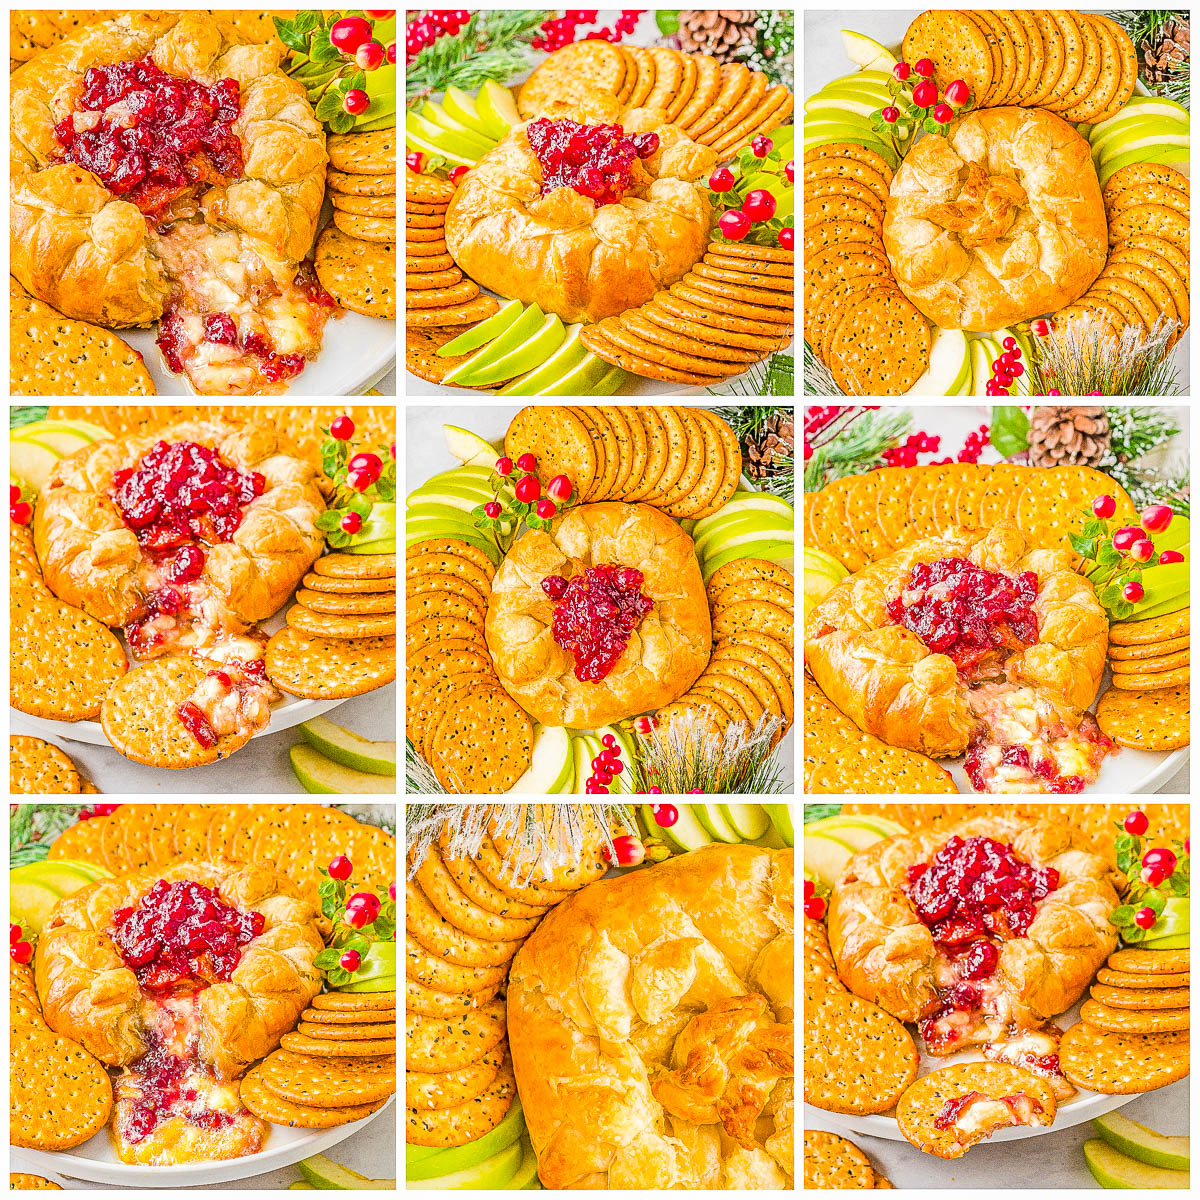 Baked Brie in Puff Pastry - Warm melted cheese, layered with cranberry sauce, and baked in flaky puff pastry is a crowd FAVORITE appetizer! Fast and EASY for you, IRRESISTIBLE for everyone else! It's the PERFECT holiday appetizer for Thanksgiving, Christmas, holiday parties, or New Year's Eve! 